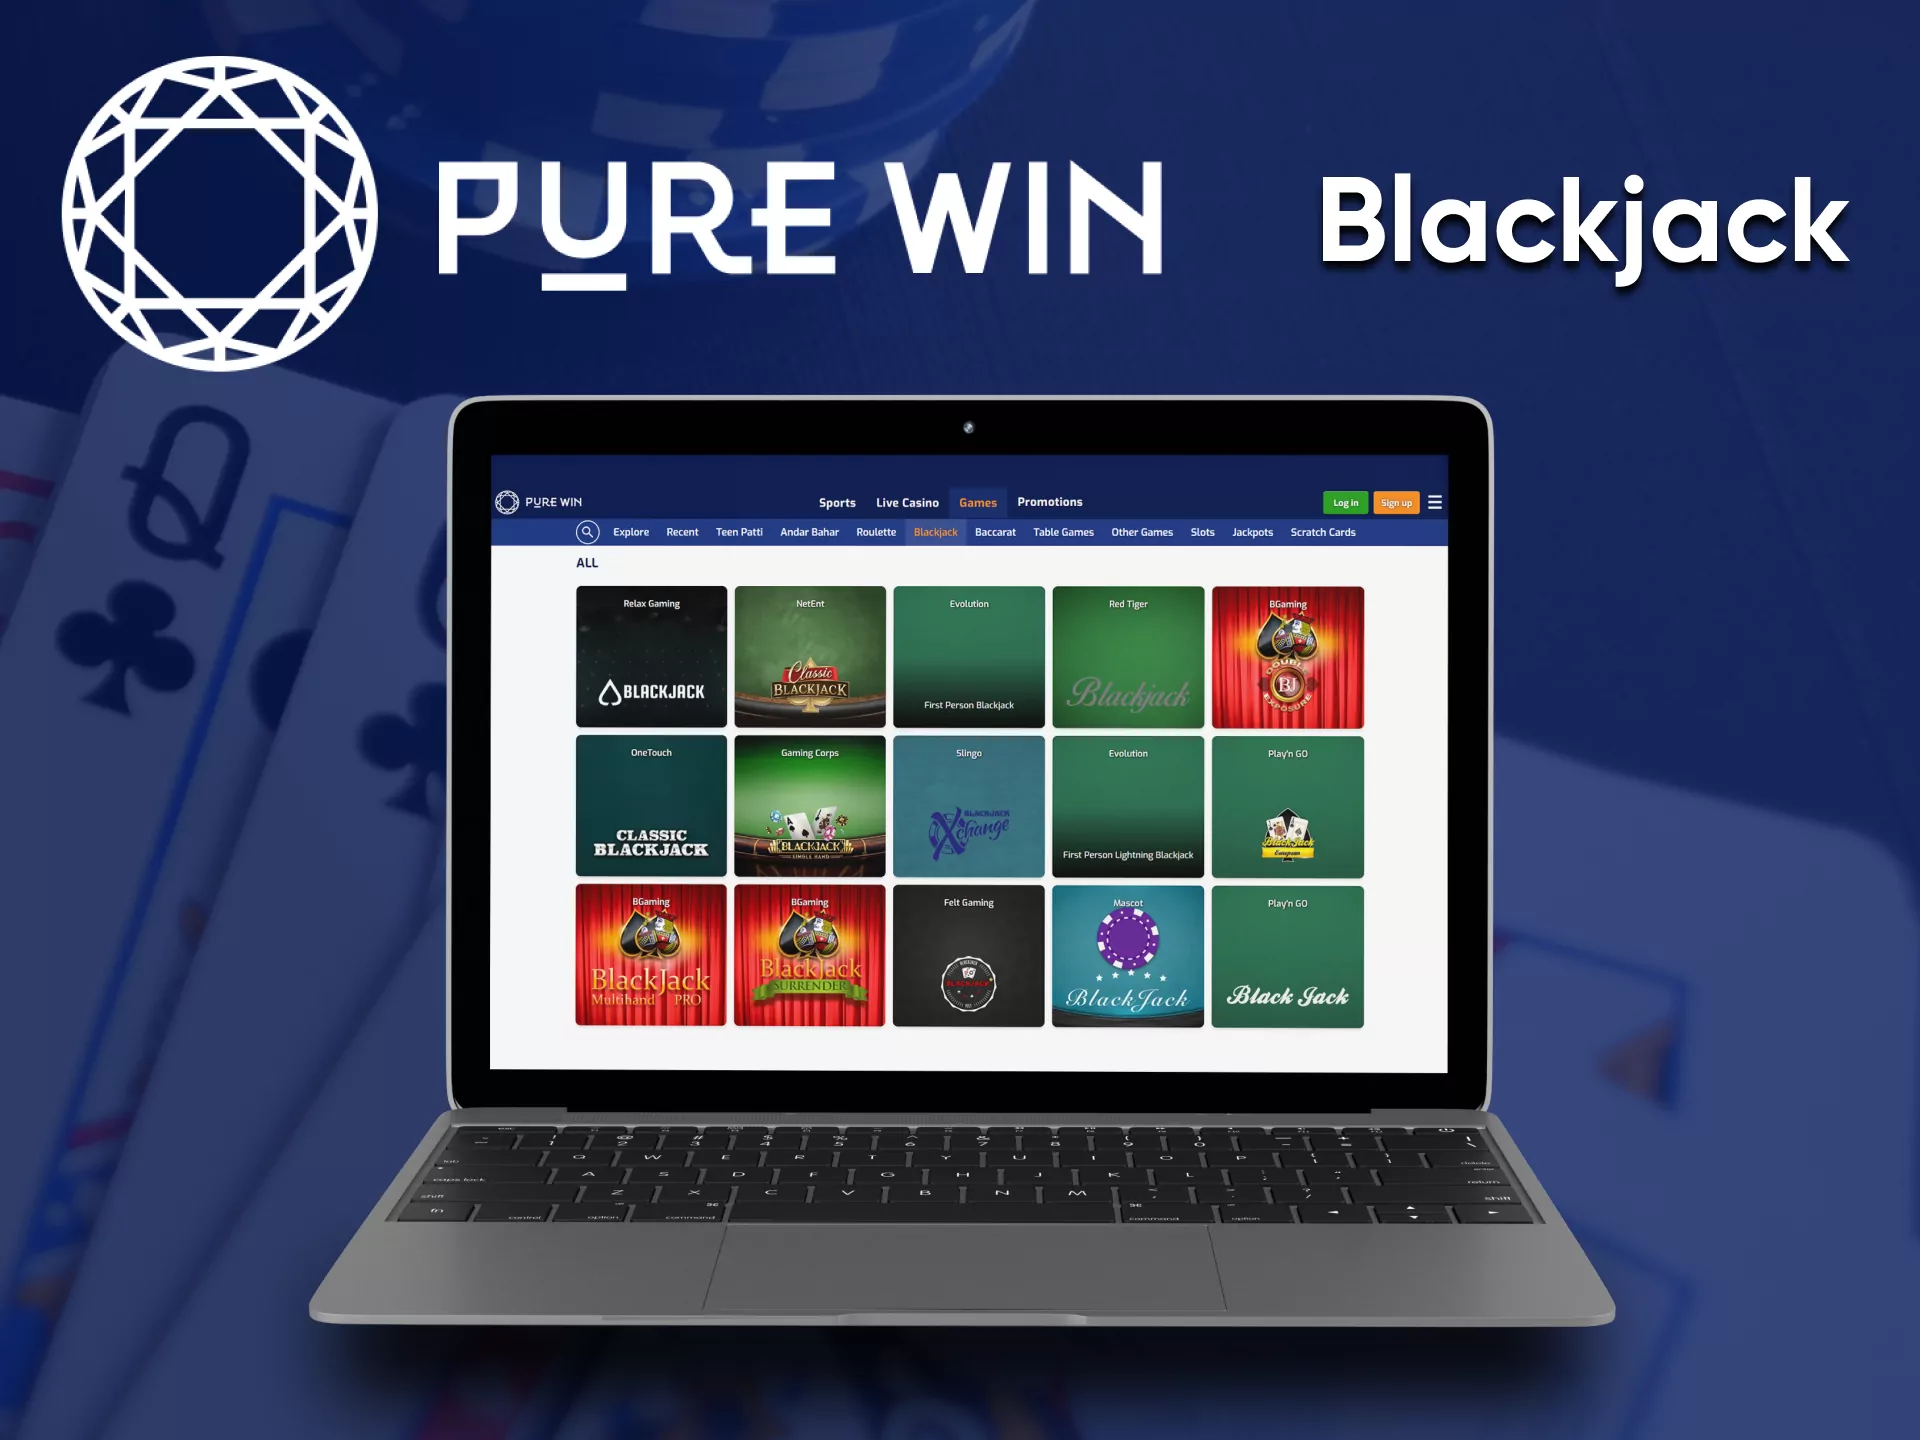 Choose a section with BlackJack from Pure Win.